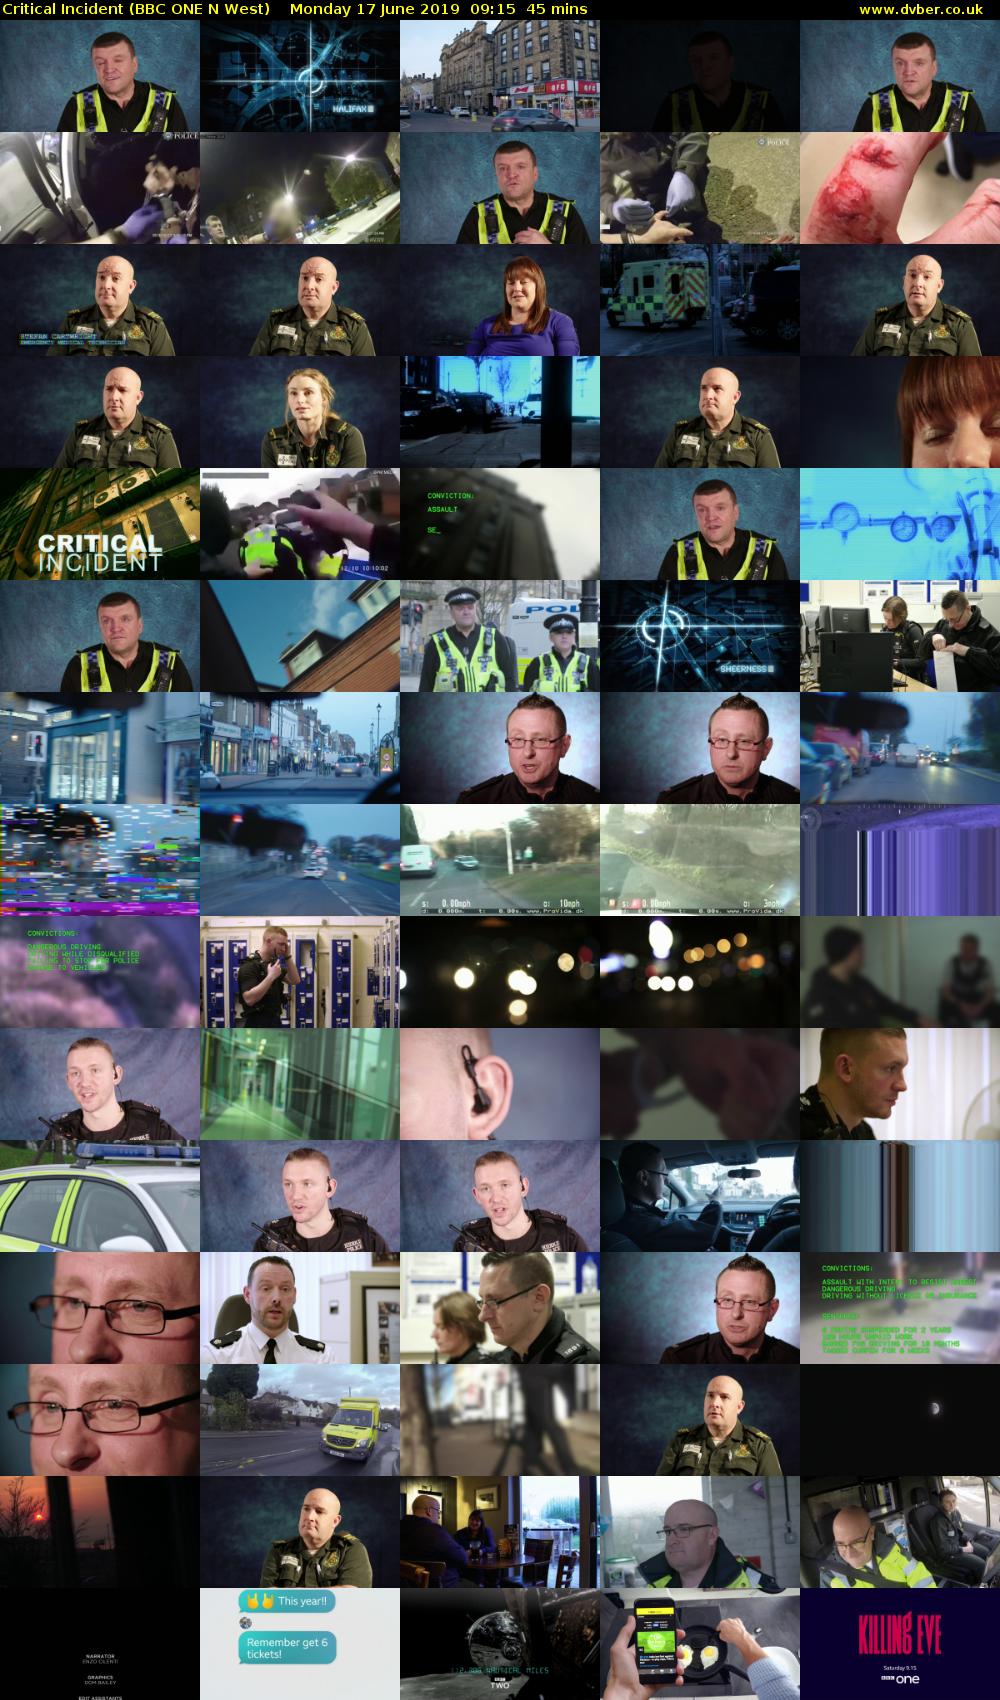 Critical Incident (BBC ONE N West) Monday 17 June 2019 09:15 - 10:00